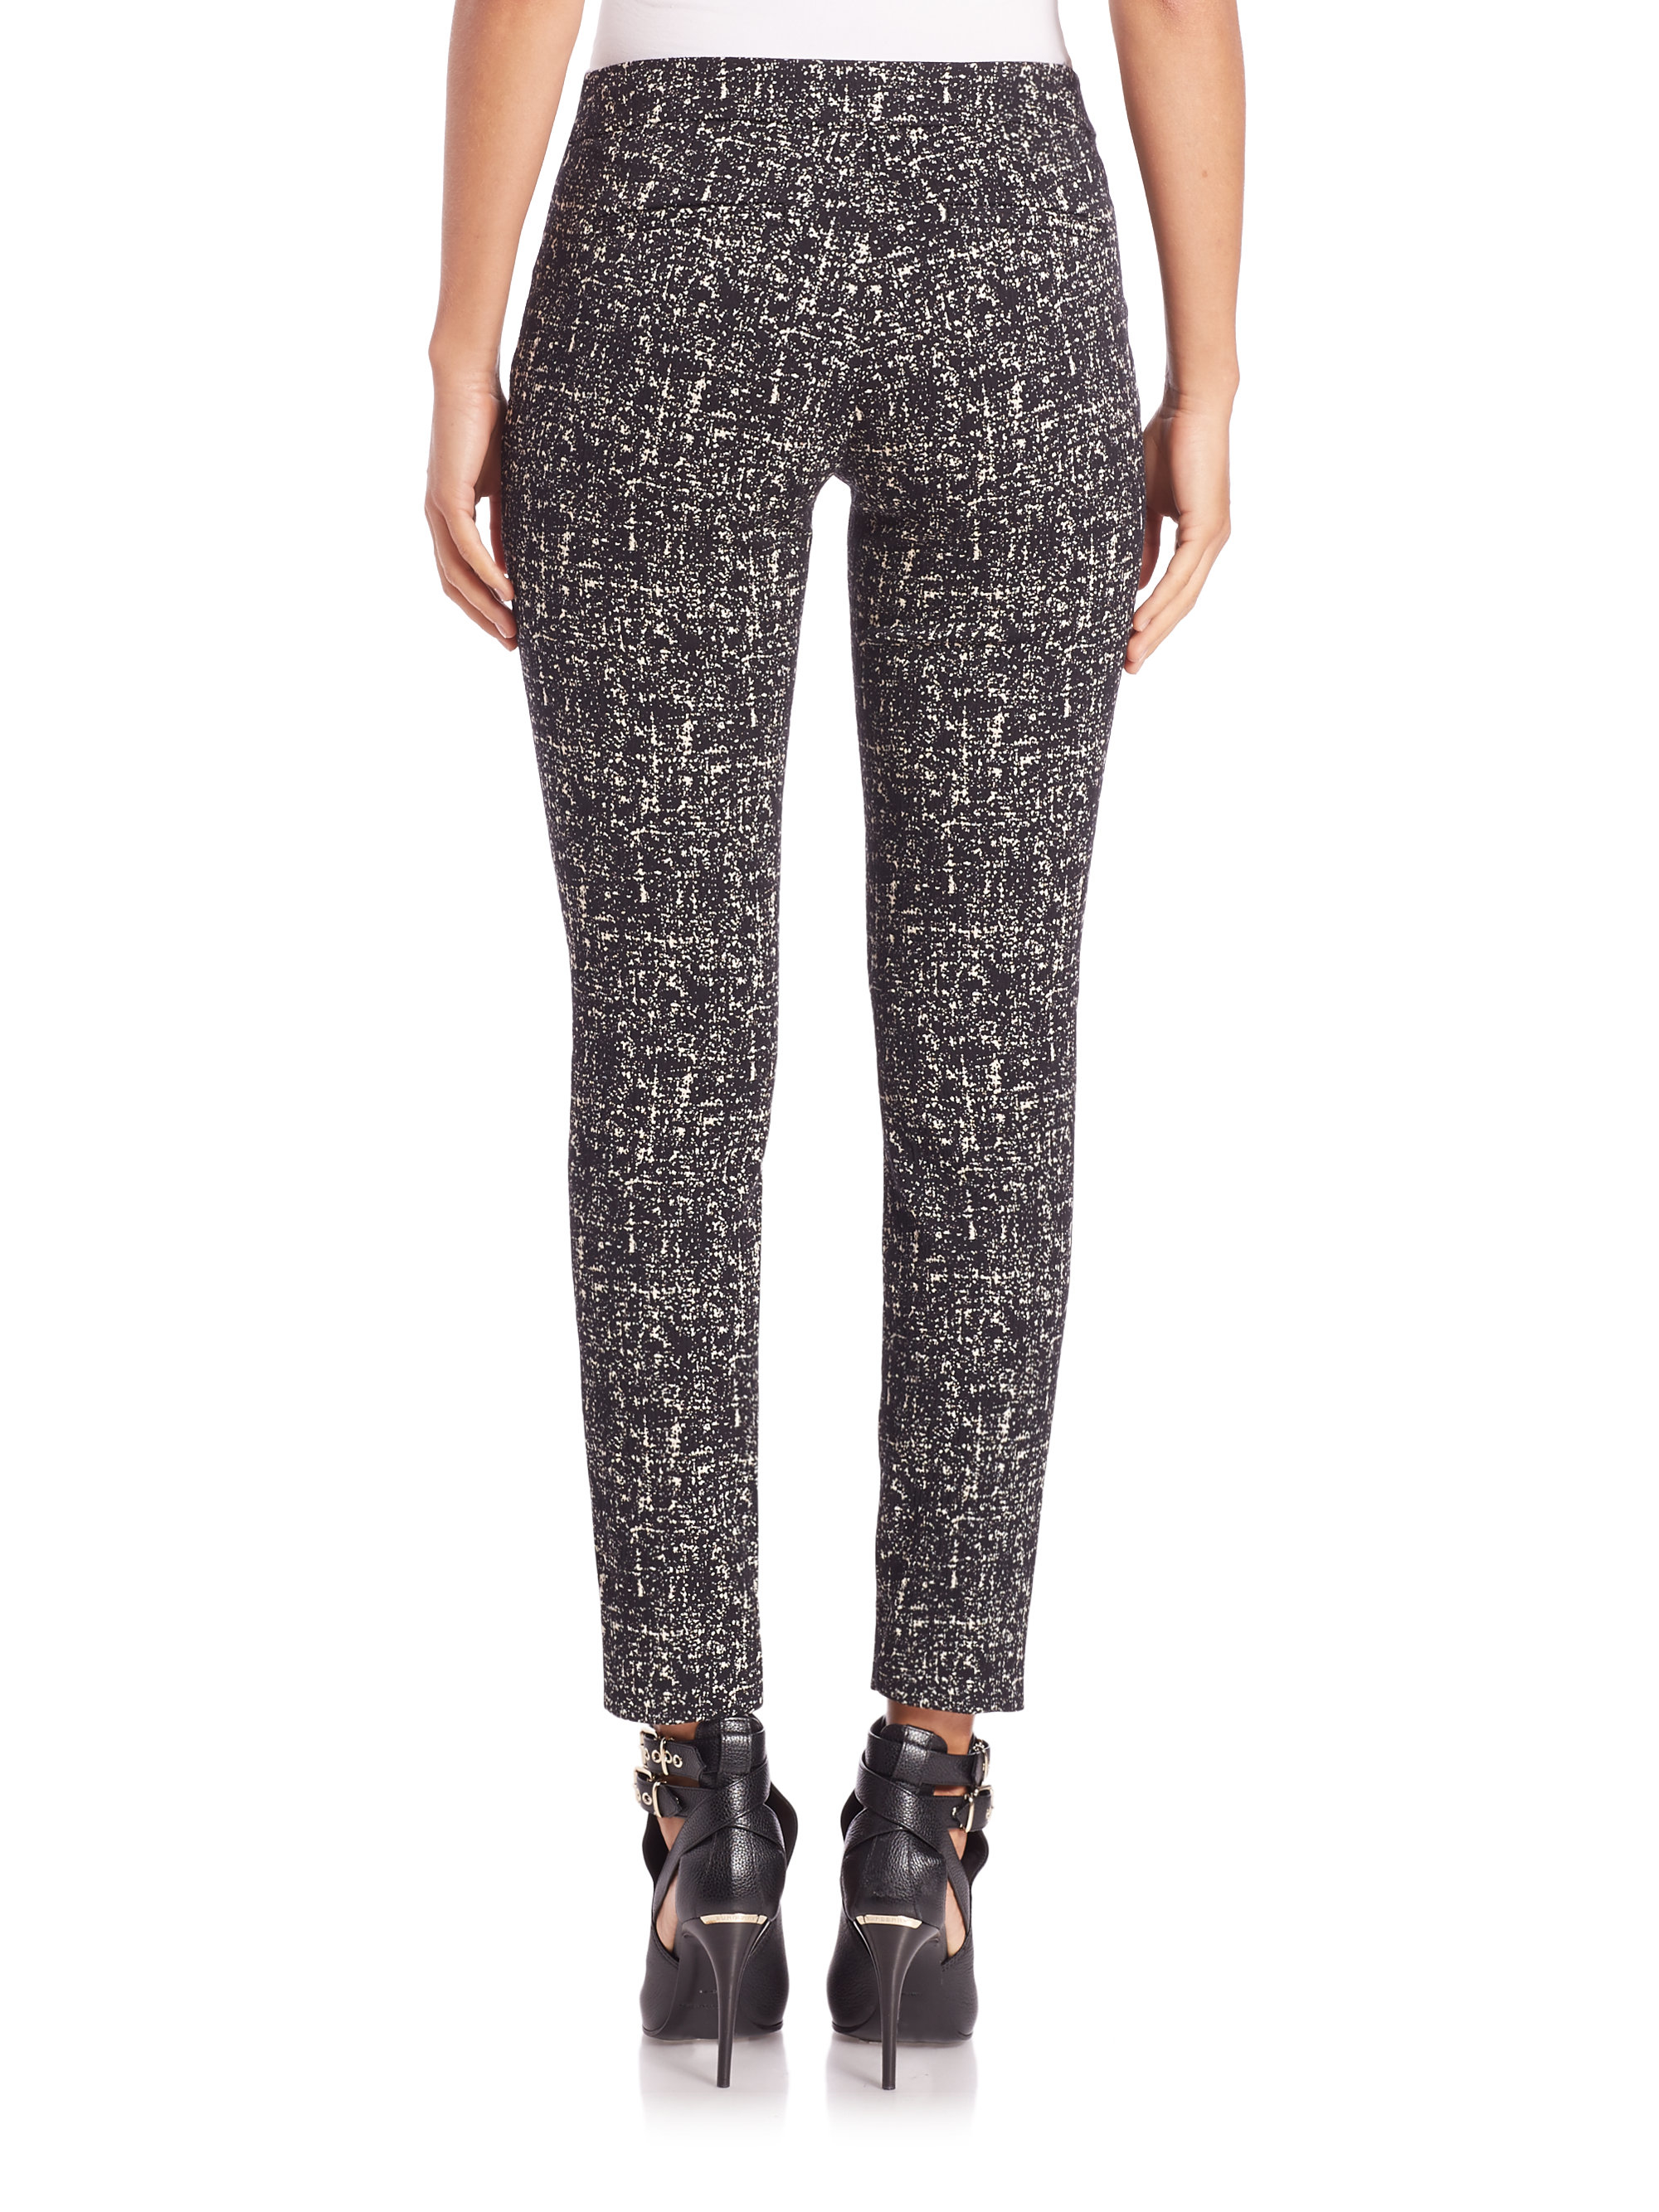 Lyst - Burberry Blaise Printed Pants in Black